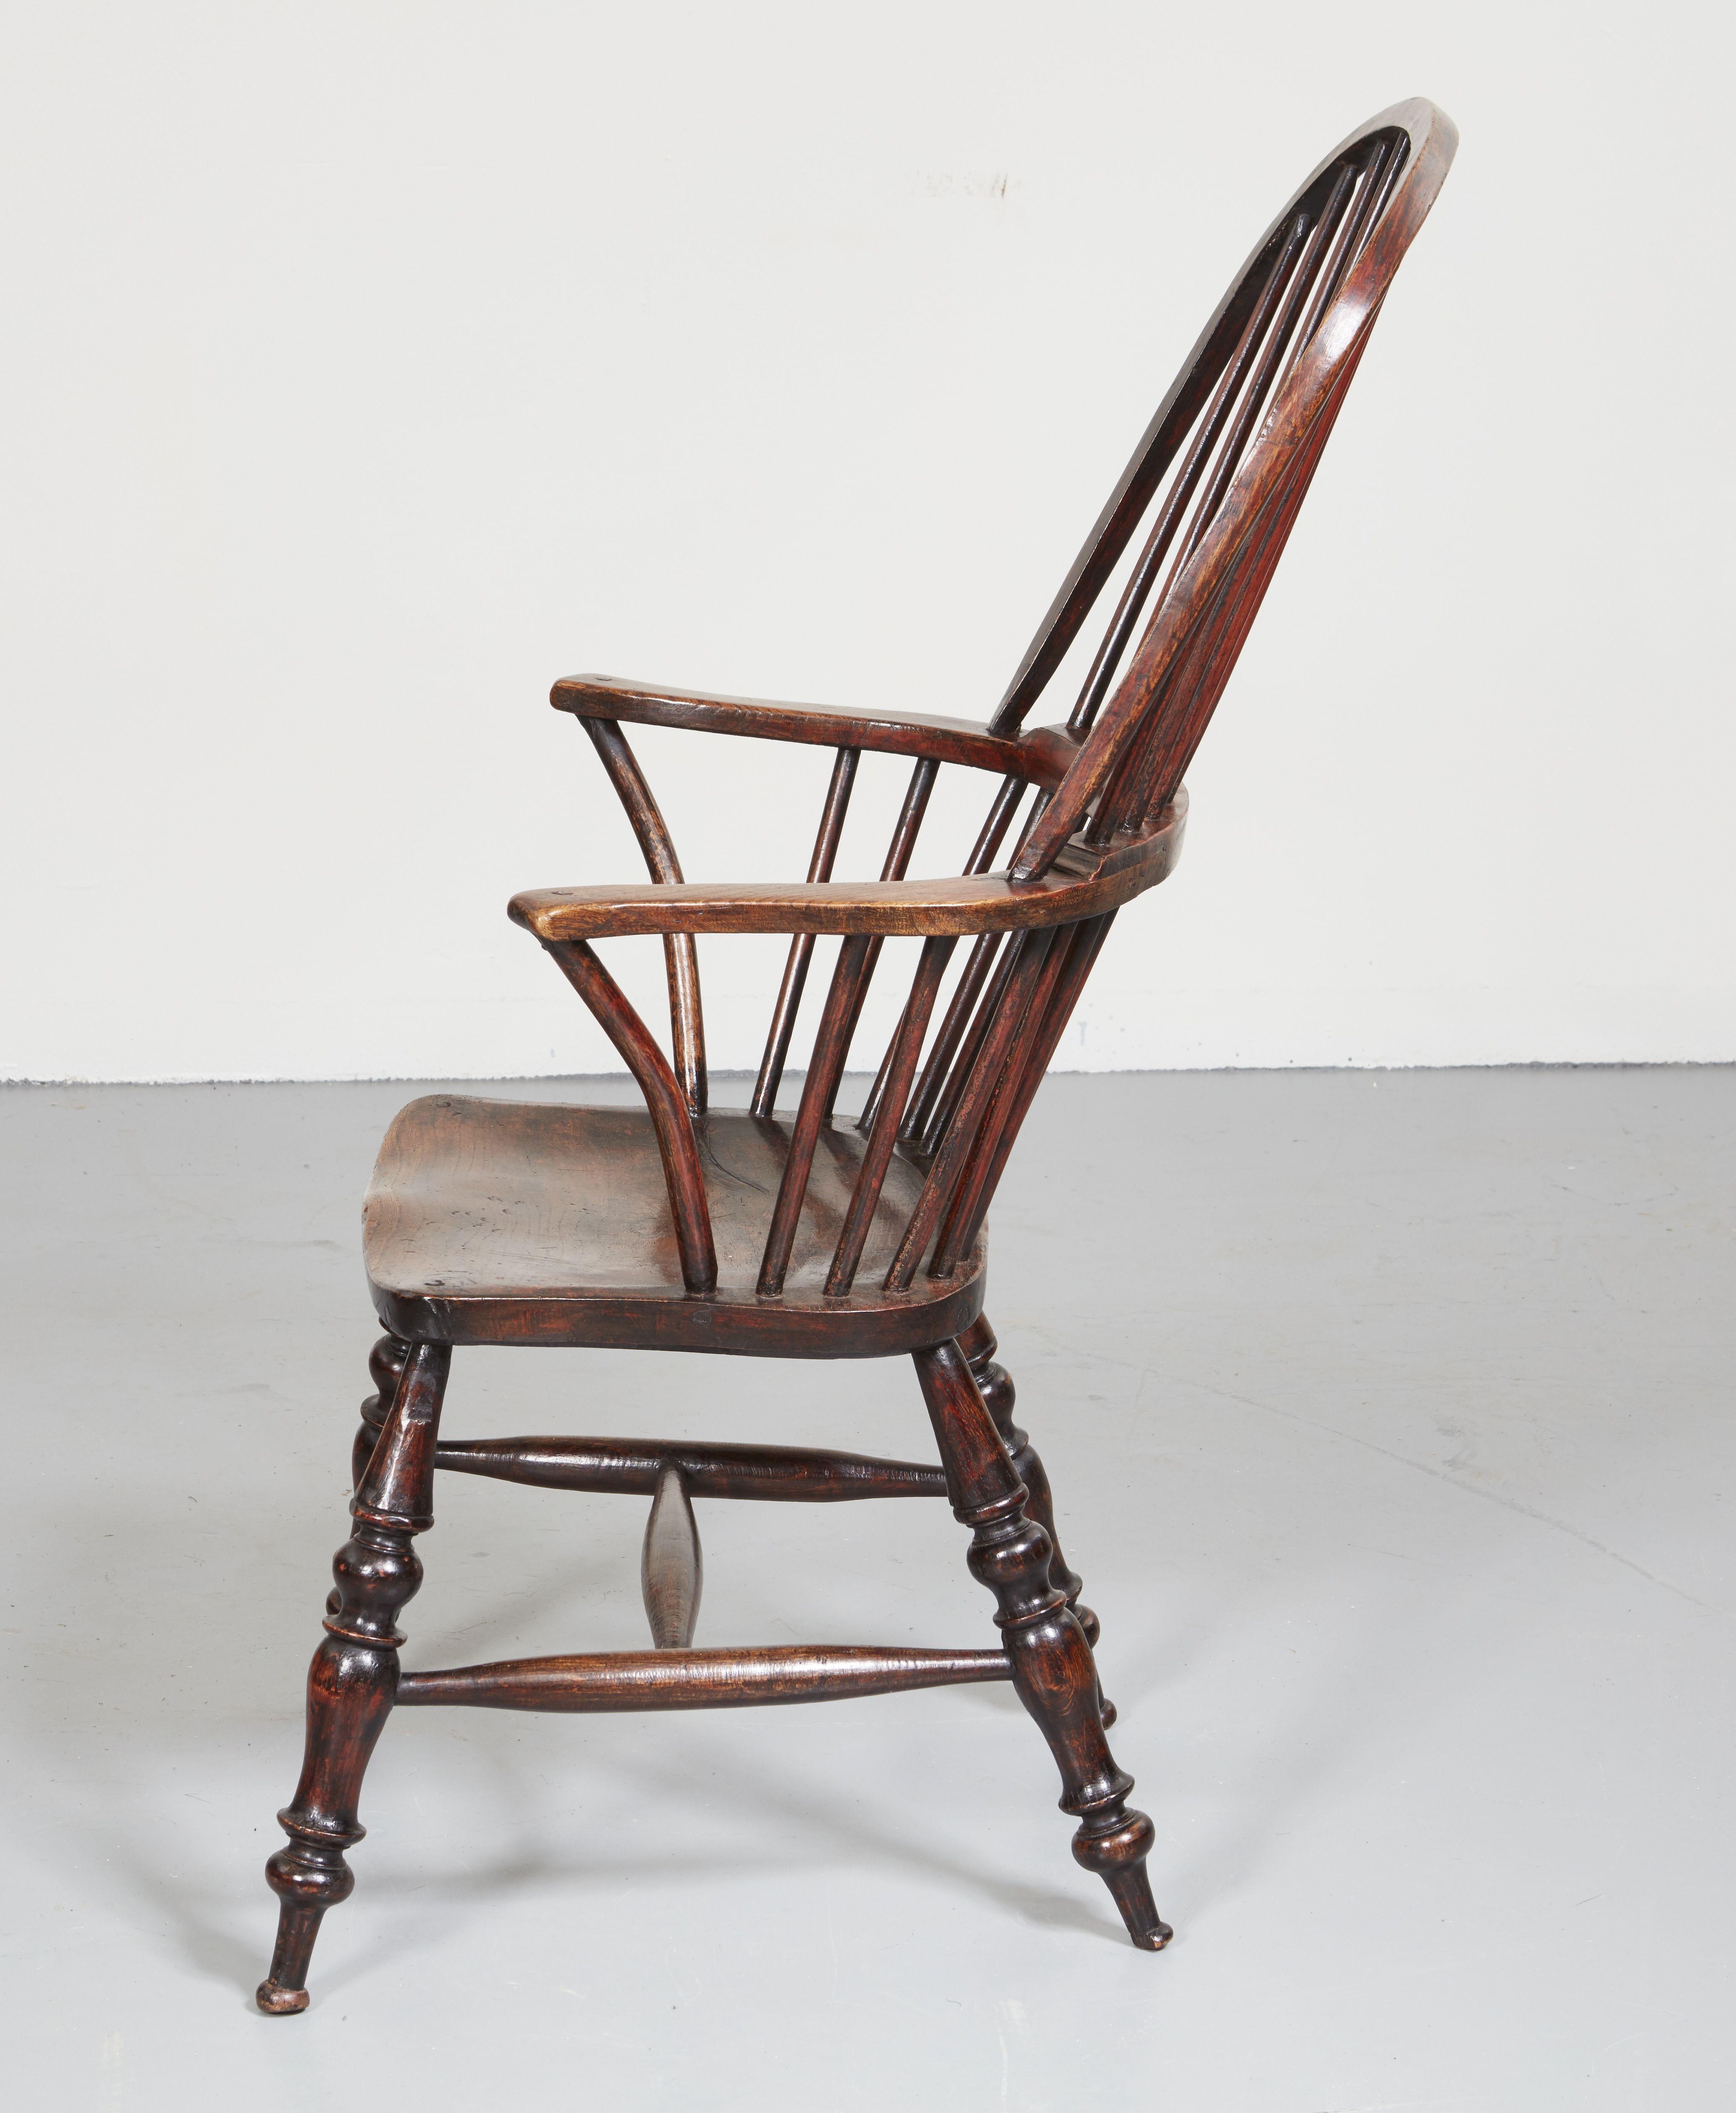 A generous and comfortable windsor armchair with excellent color. Features a high looped and raked back, flattened outswept arms, a saddled seat and boldly turned legs connected by an H stretcher.